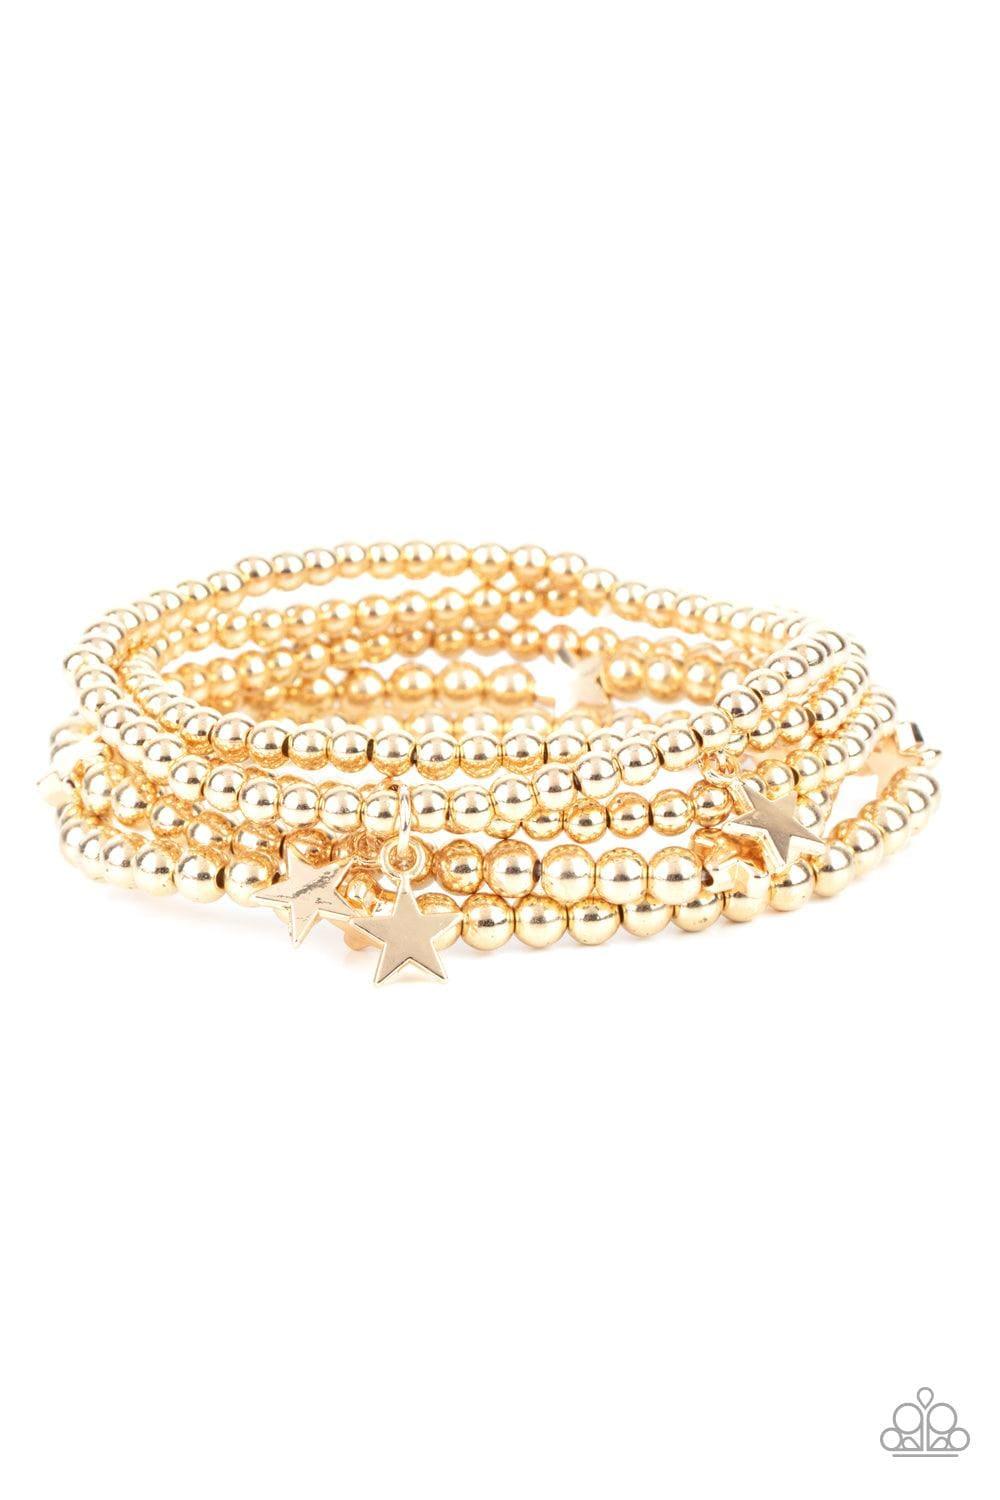 Paparazzi Accessories - American All-star - Gold Bracelet - Bling by JessieK